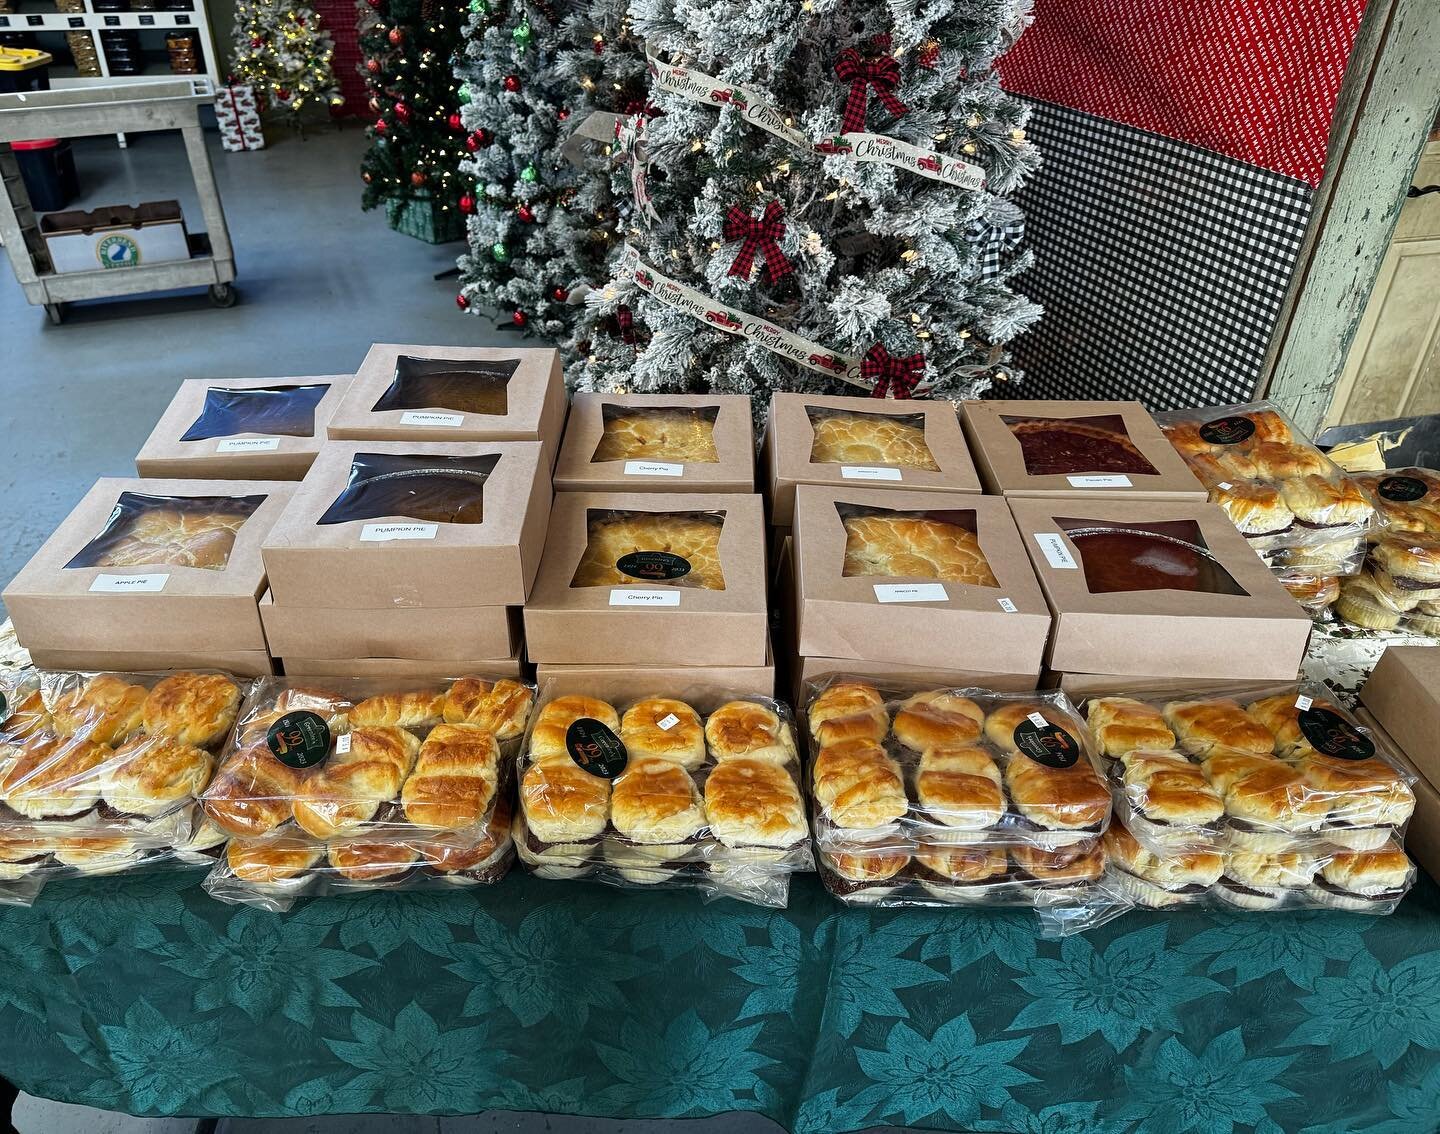 We have fresh greenlee&rsquo;s pies and dinner rolls for sale. Be sure to pick one up today. Also, the store will be closed tomorrow for Thanksgiving. We wish you all a happy holiday!